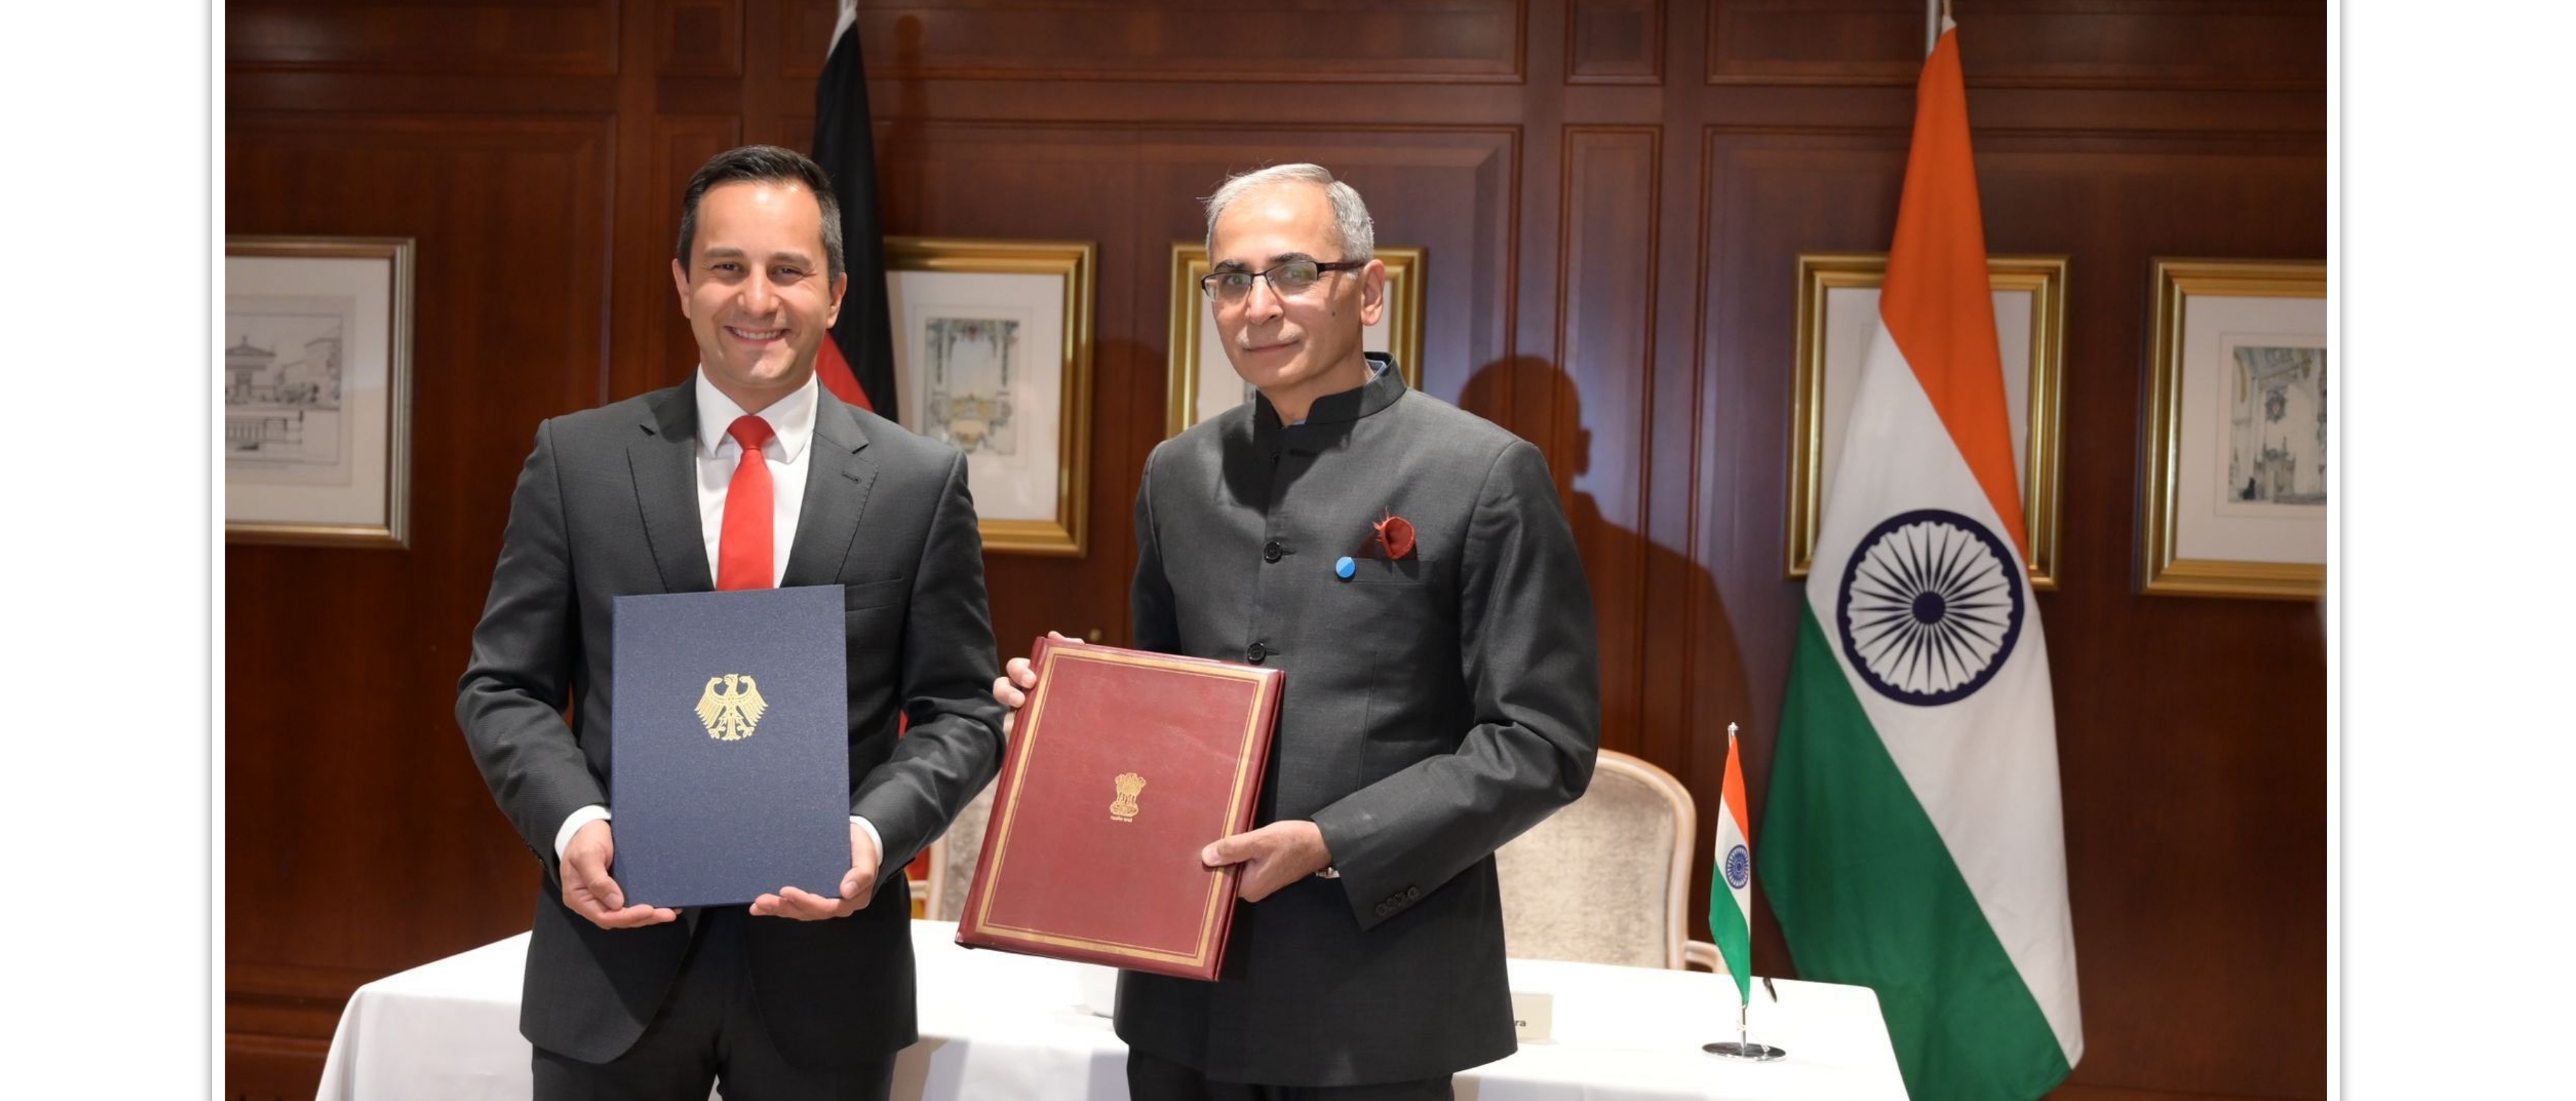  Foreign Secretary Vinay Kwatra with Secretary of Ministry of Interior of Germany Mahmut Õzdemir initiating the Comprehensive Migration & Mobility Partnership Agreement at the 6th India-Germany Inter-Governmental Consultations